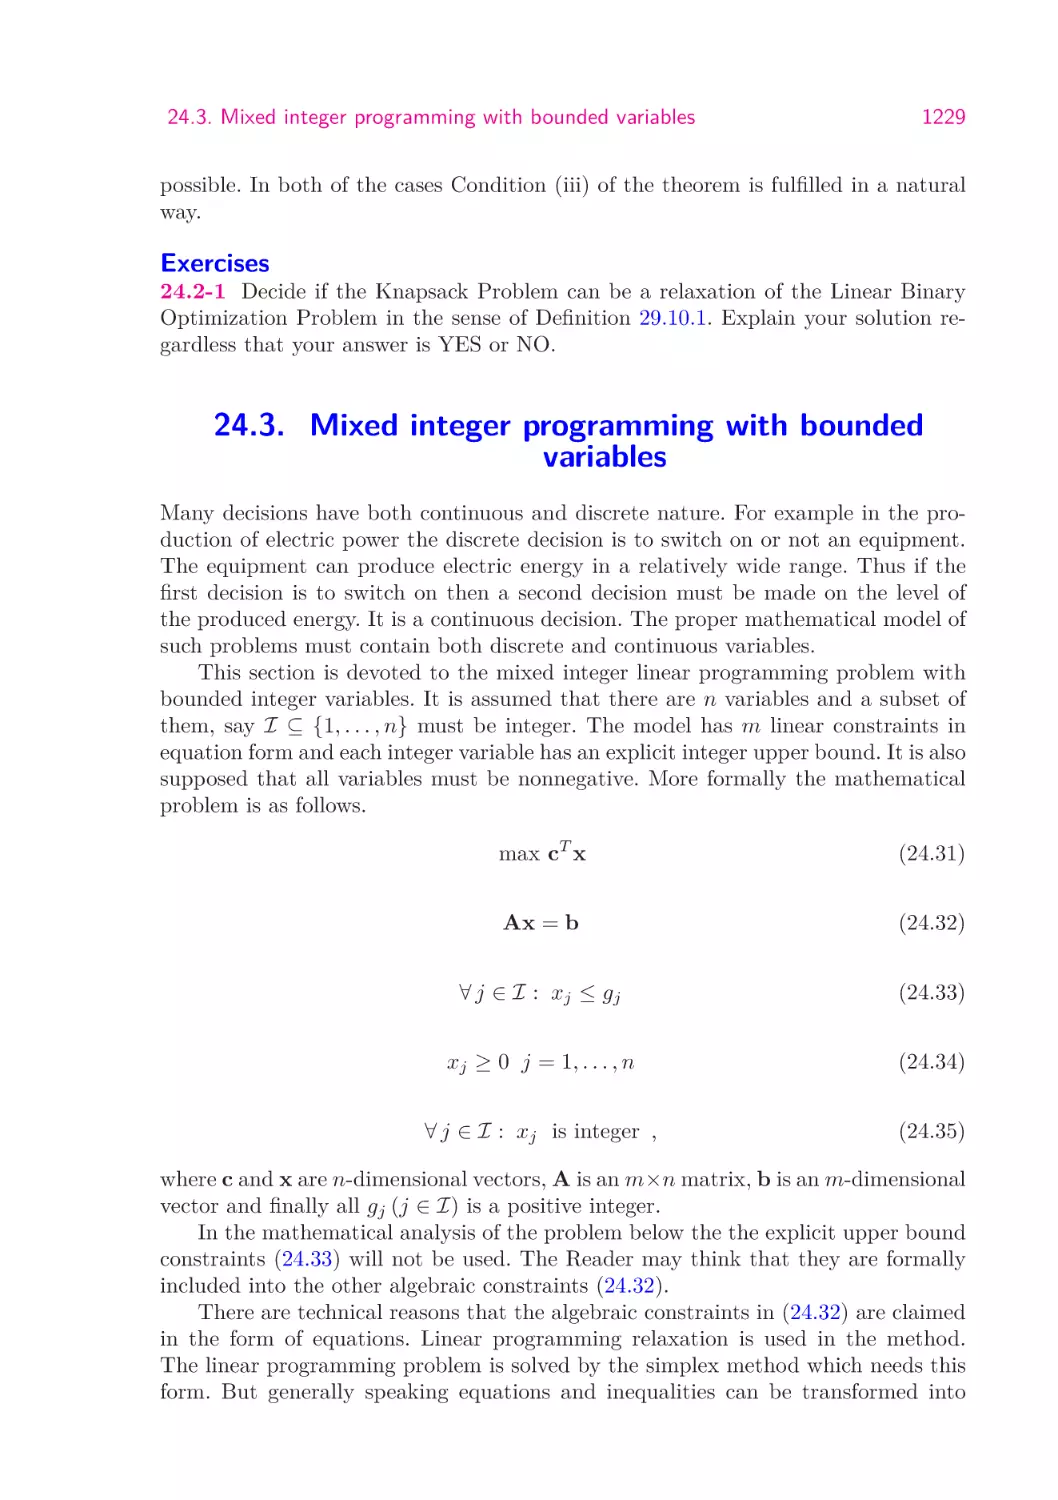 24.3.  Mixed integer programming with bounded variables